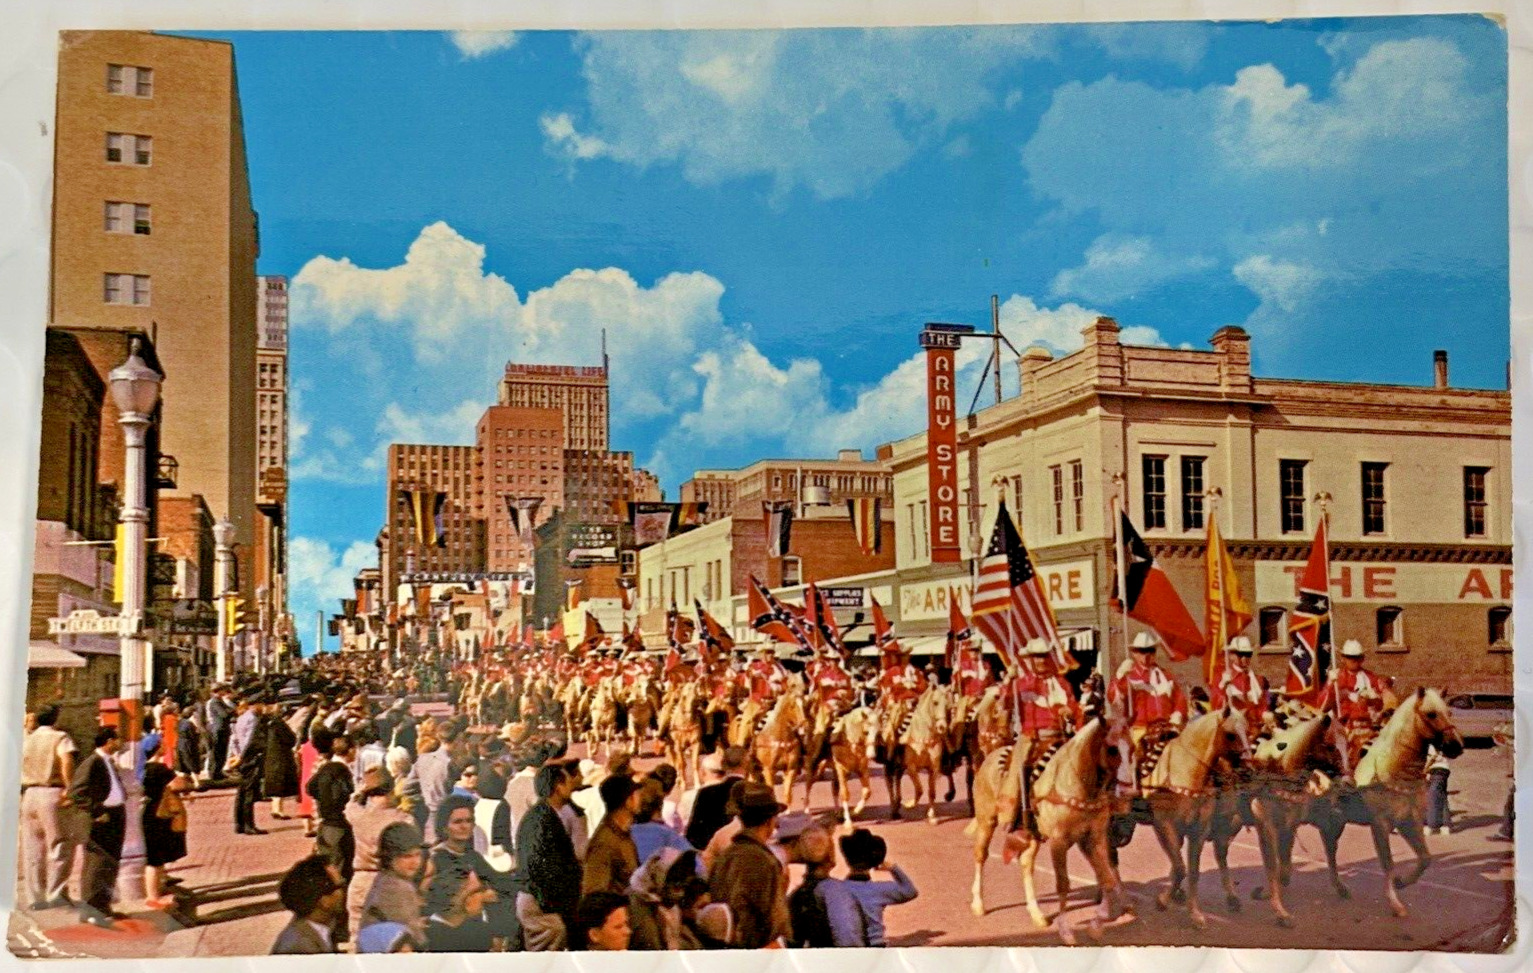 Postcard TX Fort Worth Annual Stock Show Rodeo Parade photo posted 1974 horses